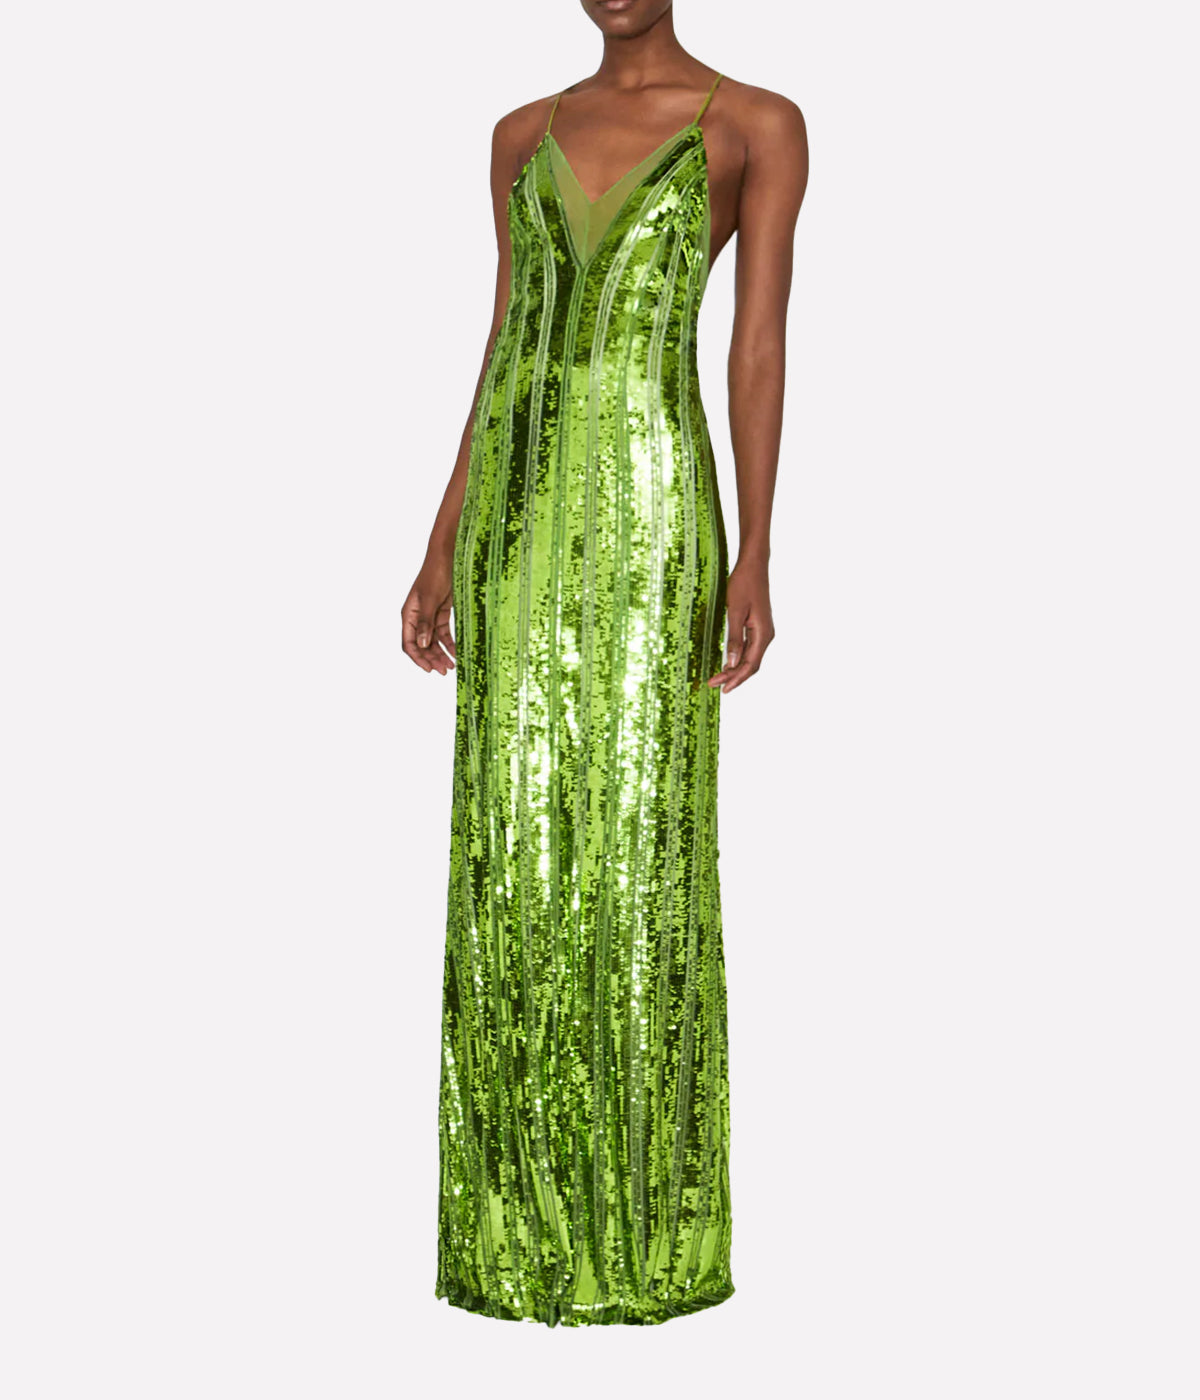 Kate Dress in Bright Green